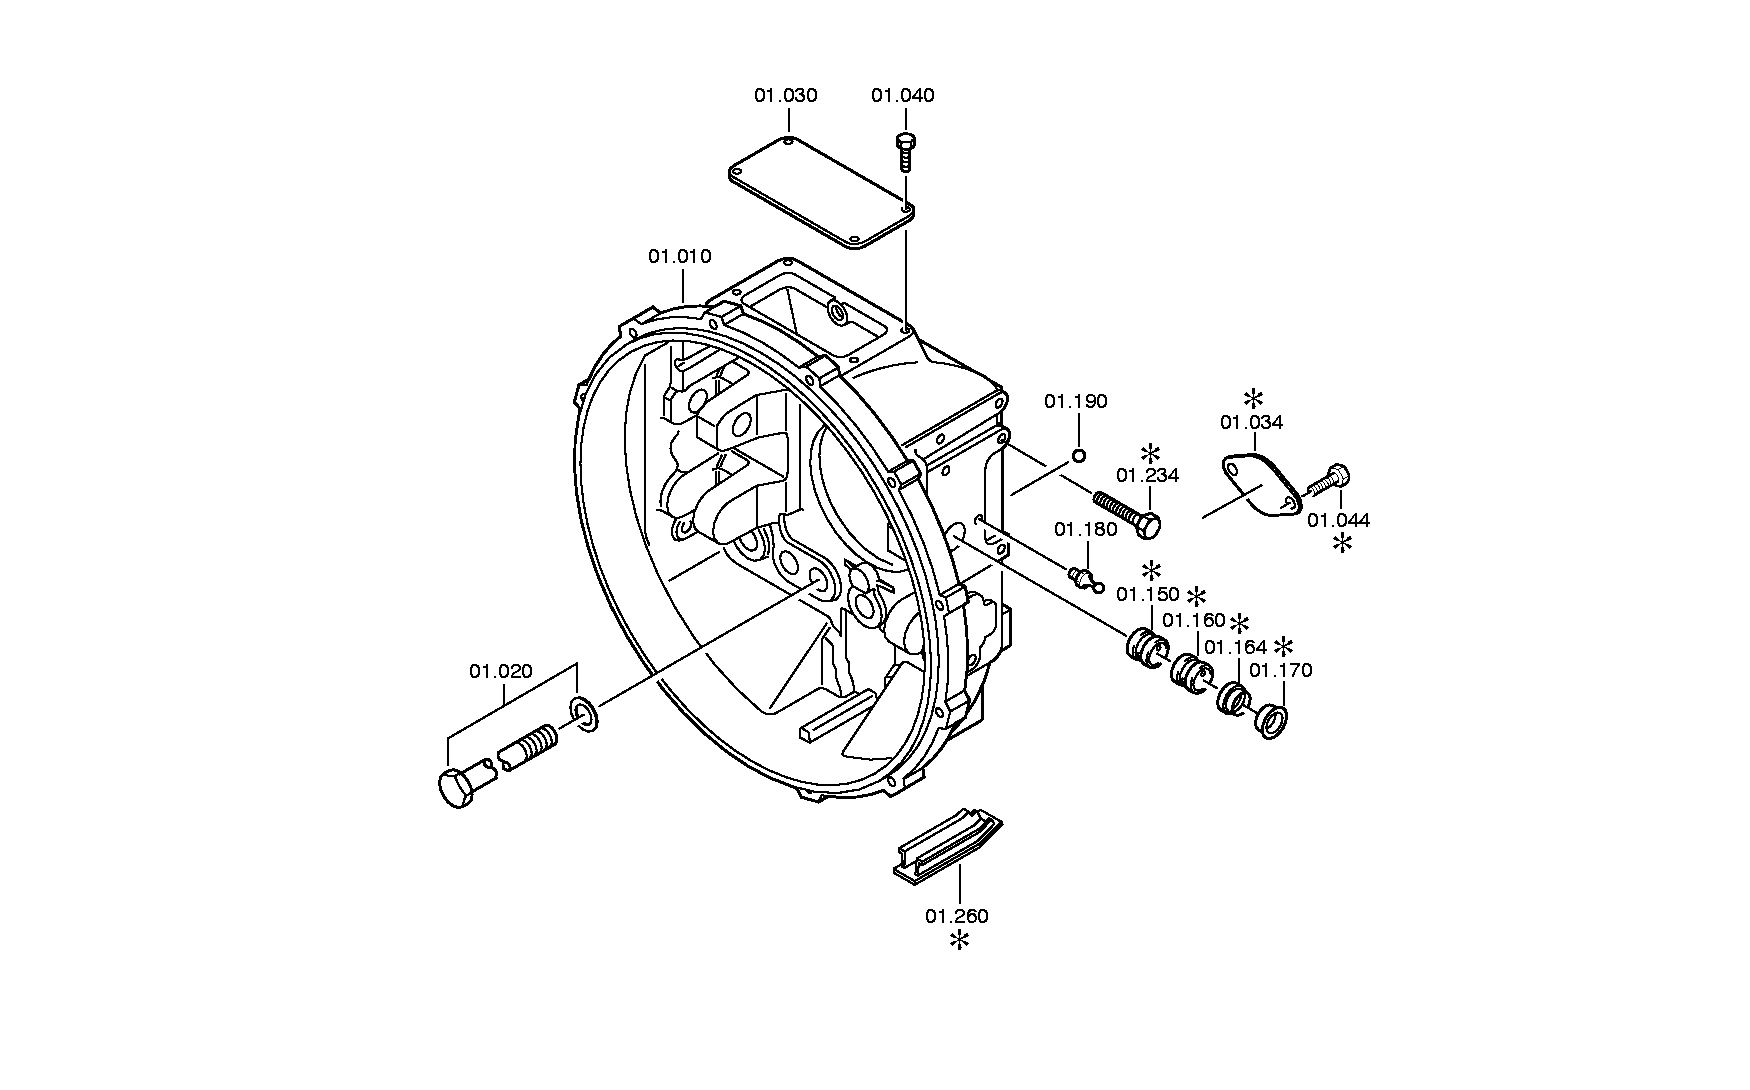 drawing for DEUTZ AG 04226908 - COVER (figure 4)